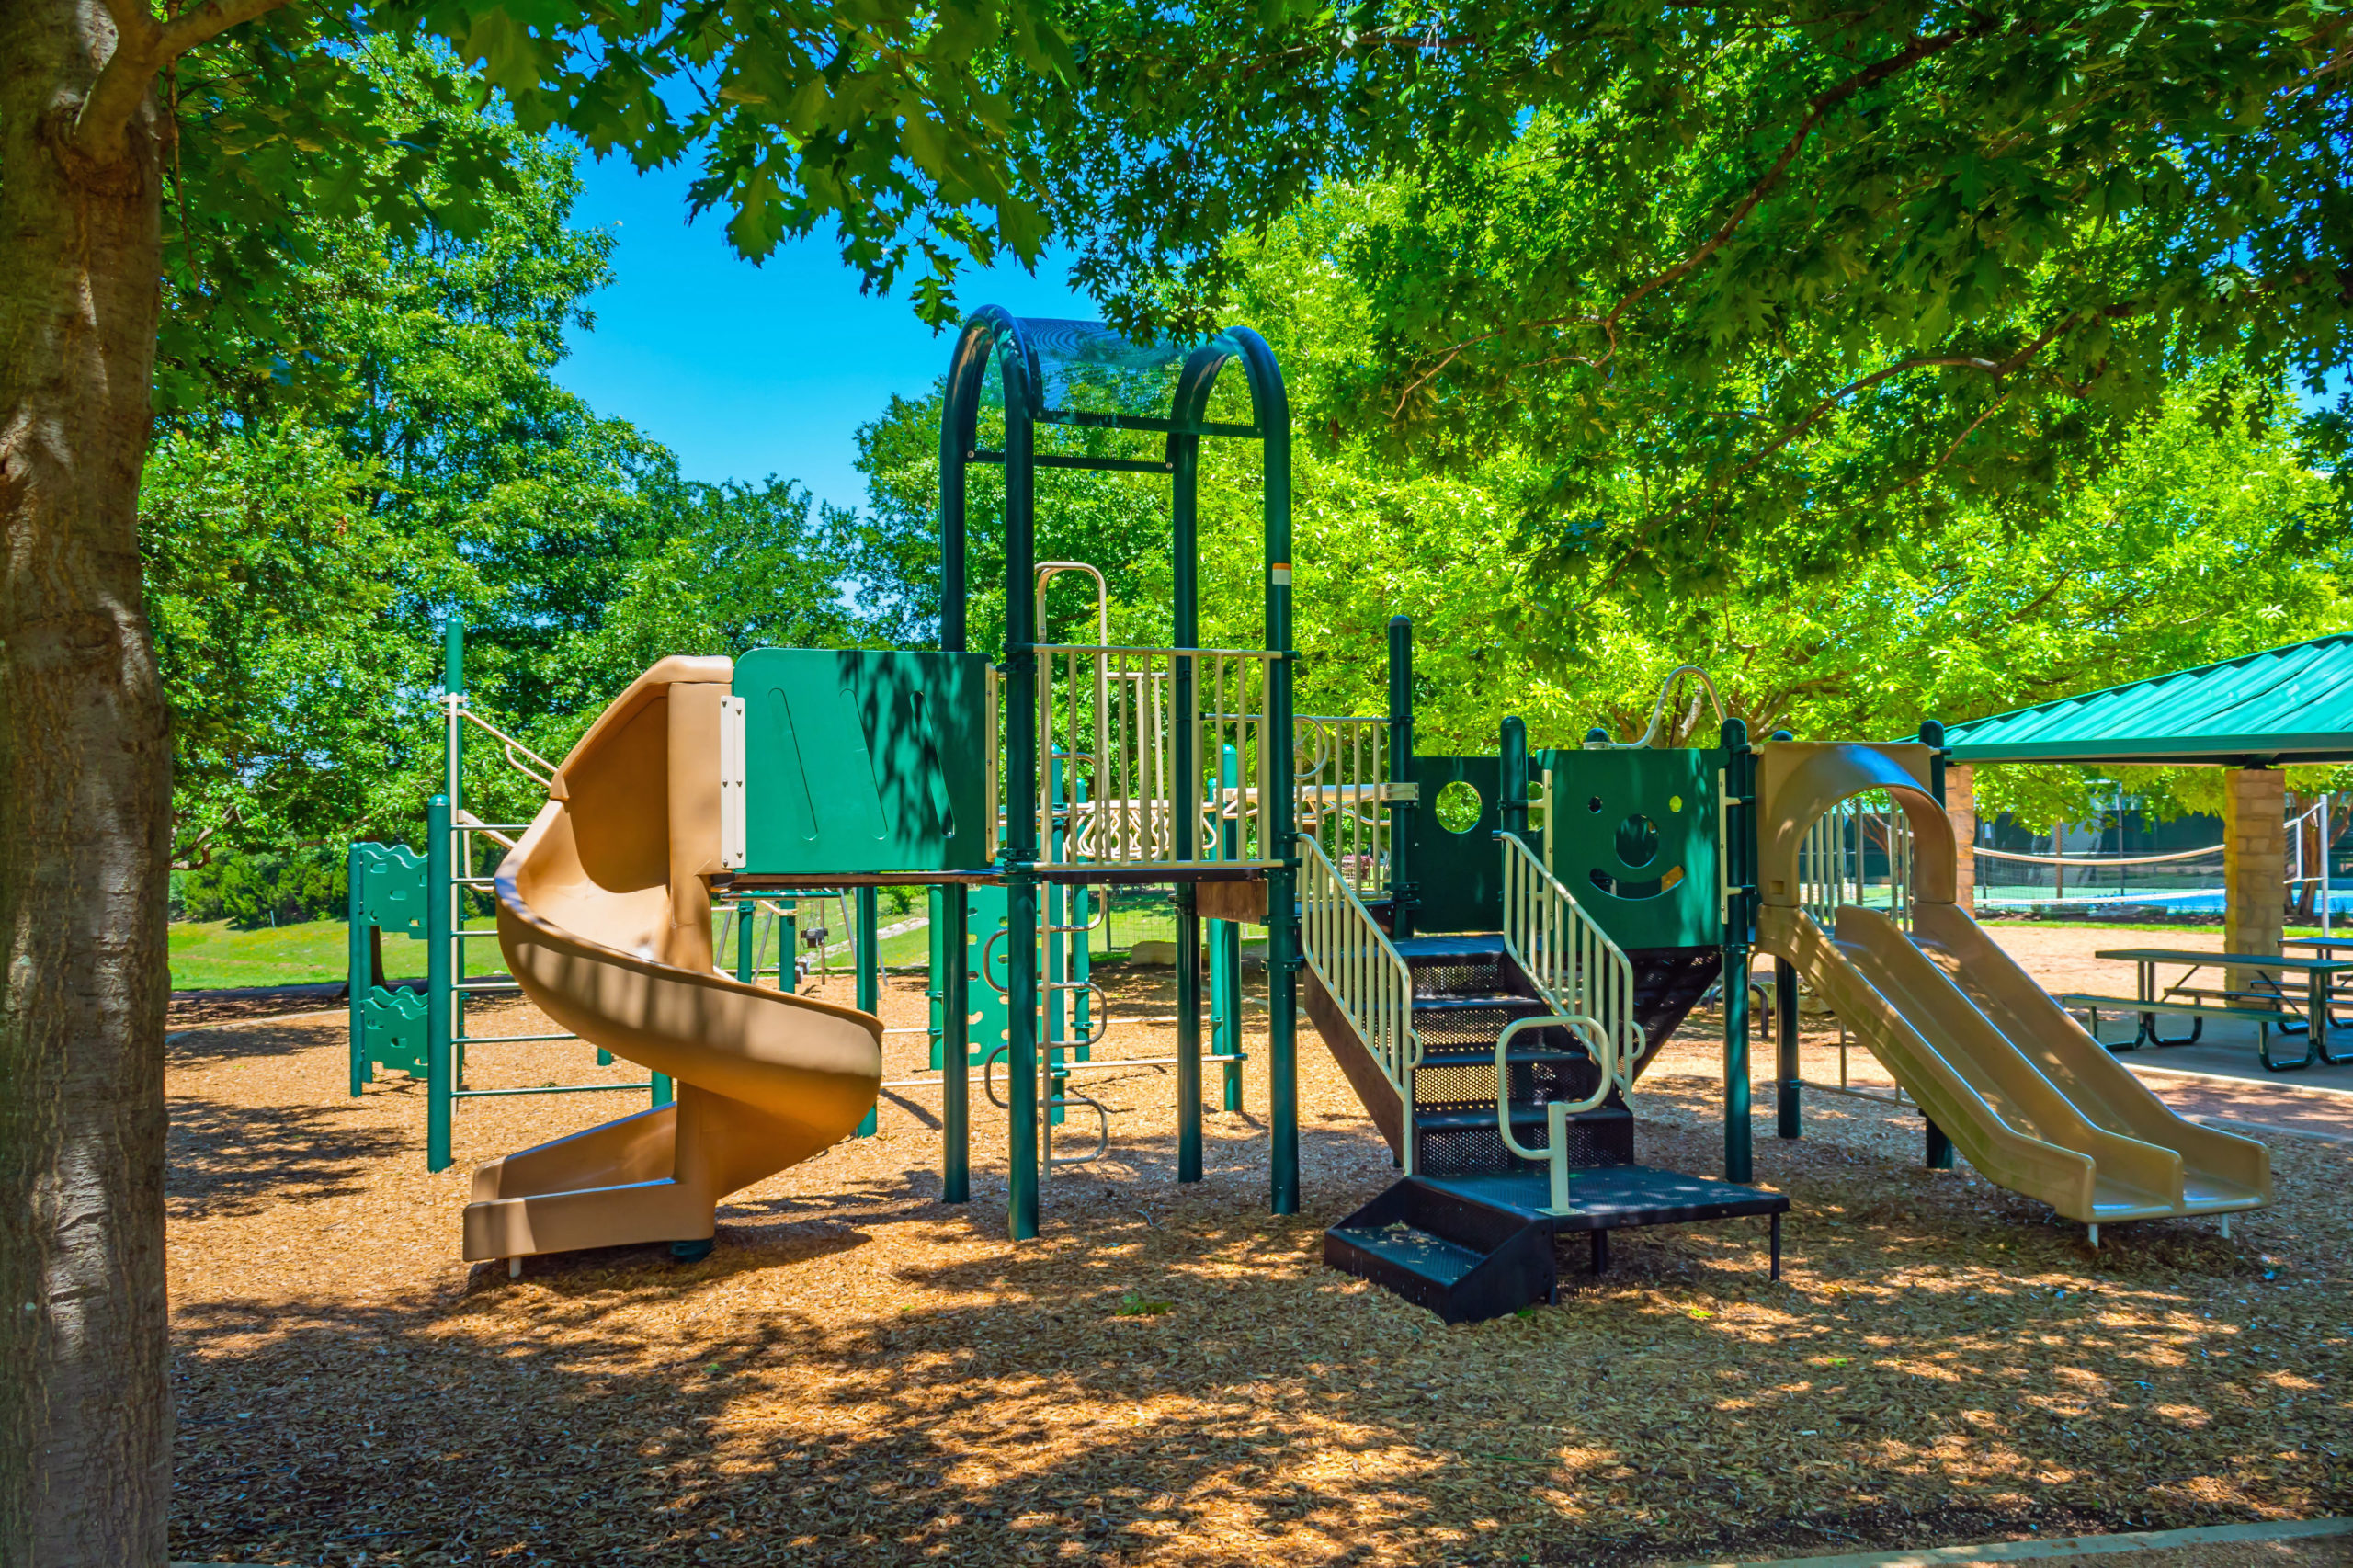 Picture of the playground at Fern Bluff Park.